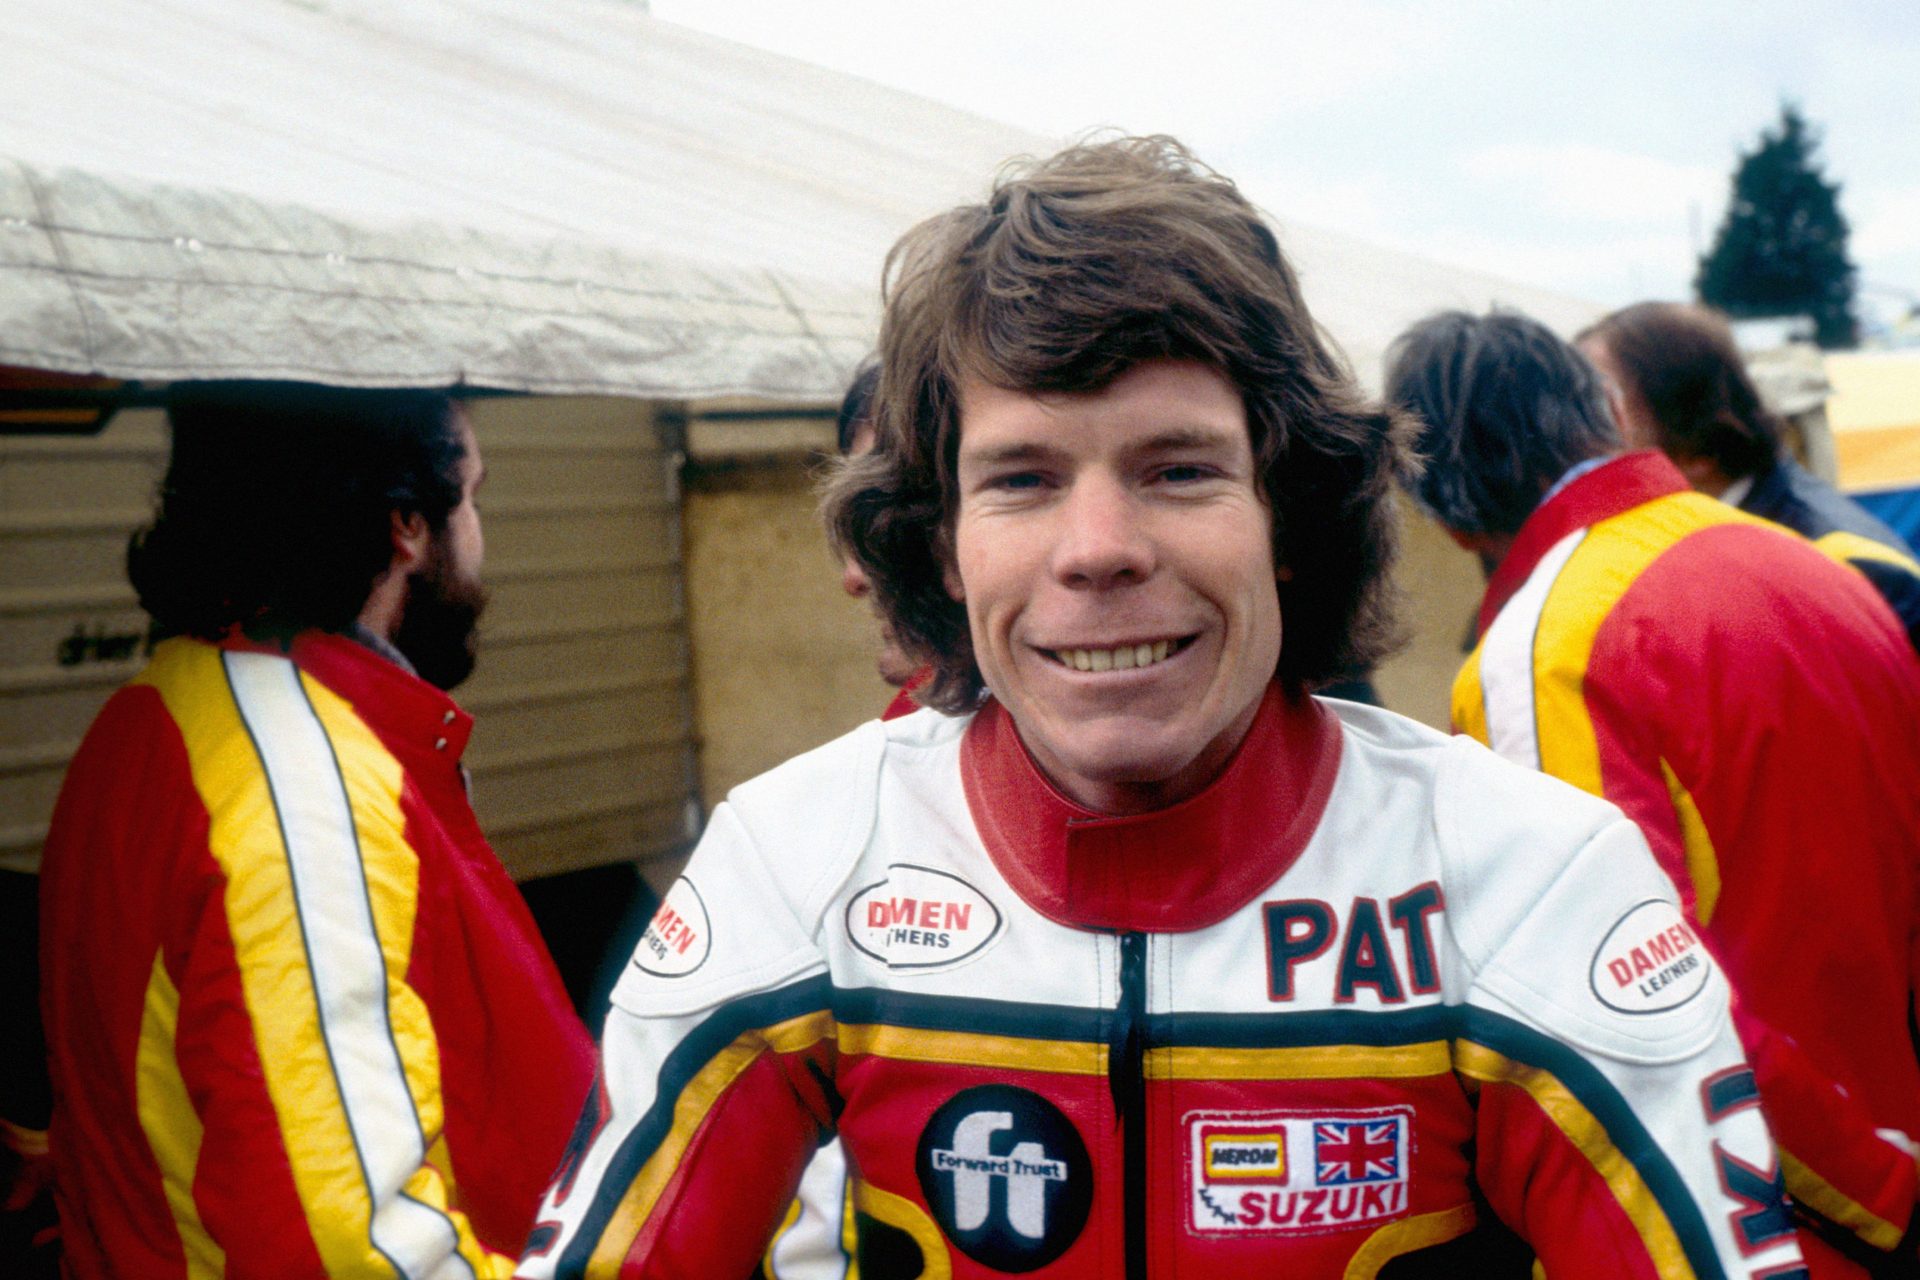 <p>Rider Pat Hennen, the first American to win the 500cc Grand Prix motorcycle racing World Championship, died at the age of 70. He had long suffered from brain damage after a motorcycle accident.</p>